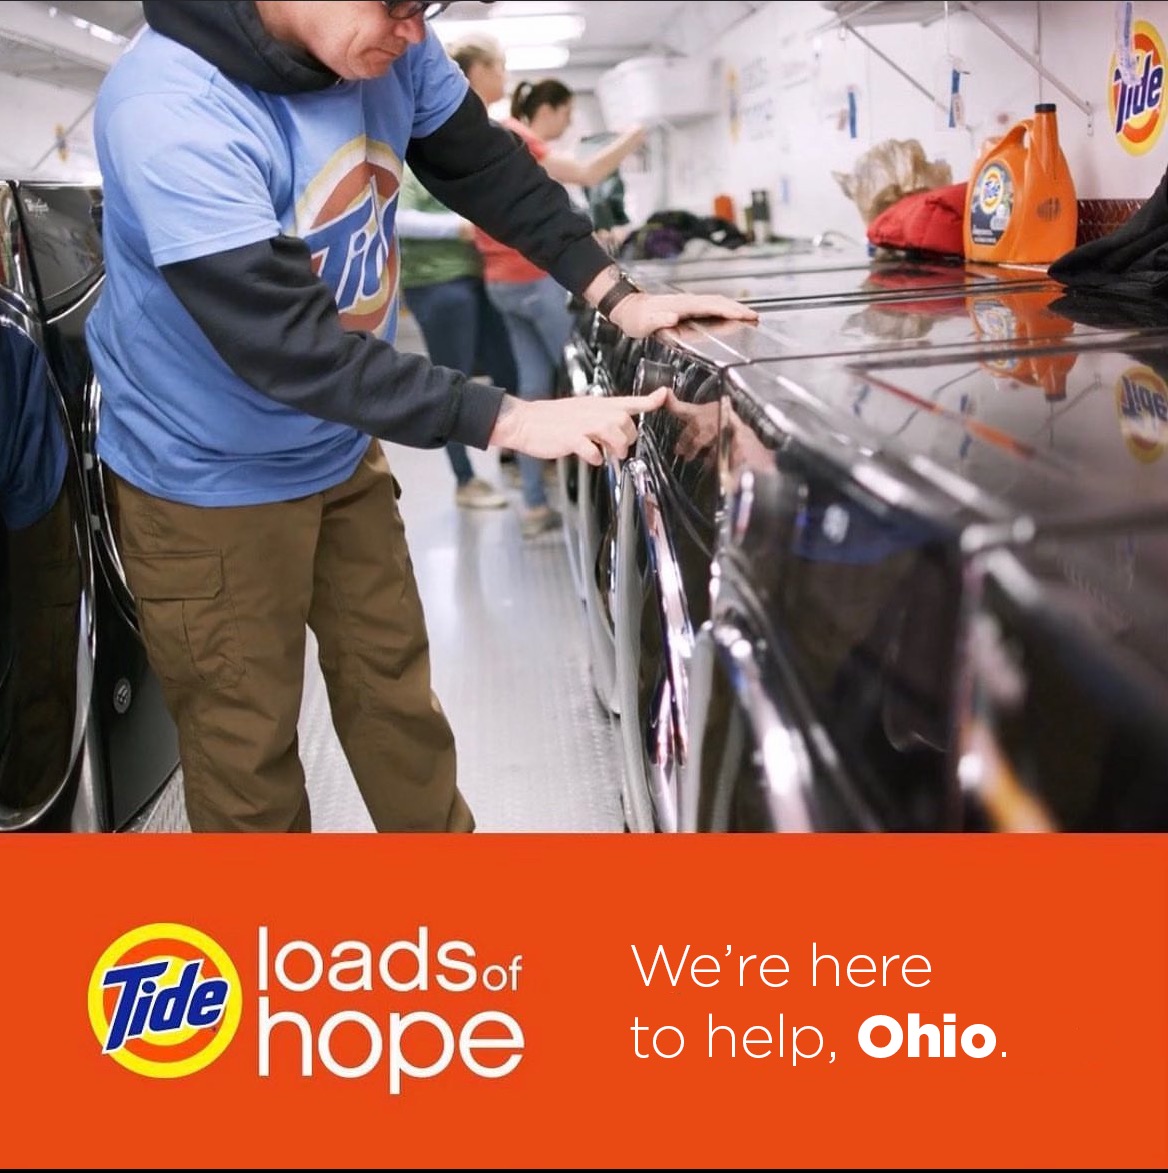 Tide Loads of Hope and @WalmartOrg are here to help. @ProcterGamble is teaming up with @M25M_org to provide free laundry, showers and personal care kits starting Monday, 3/18, from 9am-5pm EDT at Church of God, 432 OH-708, Russells Point, Ohio.